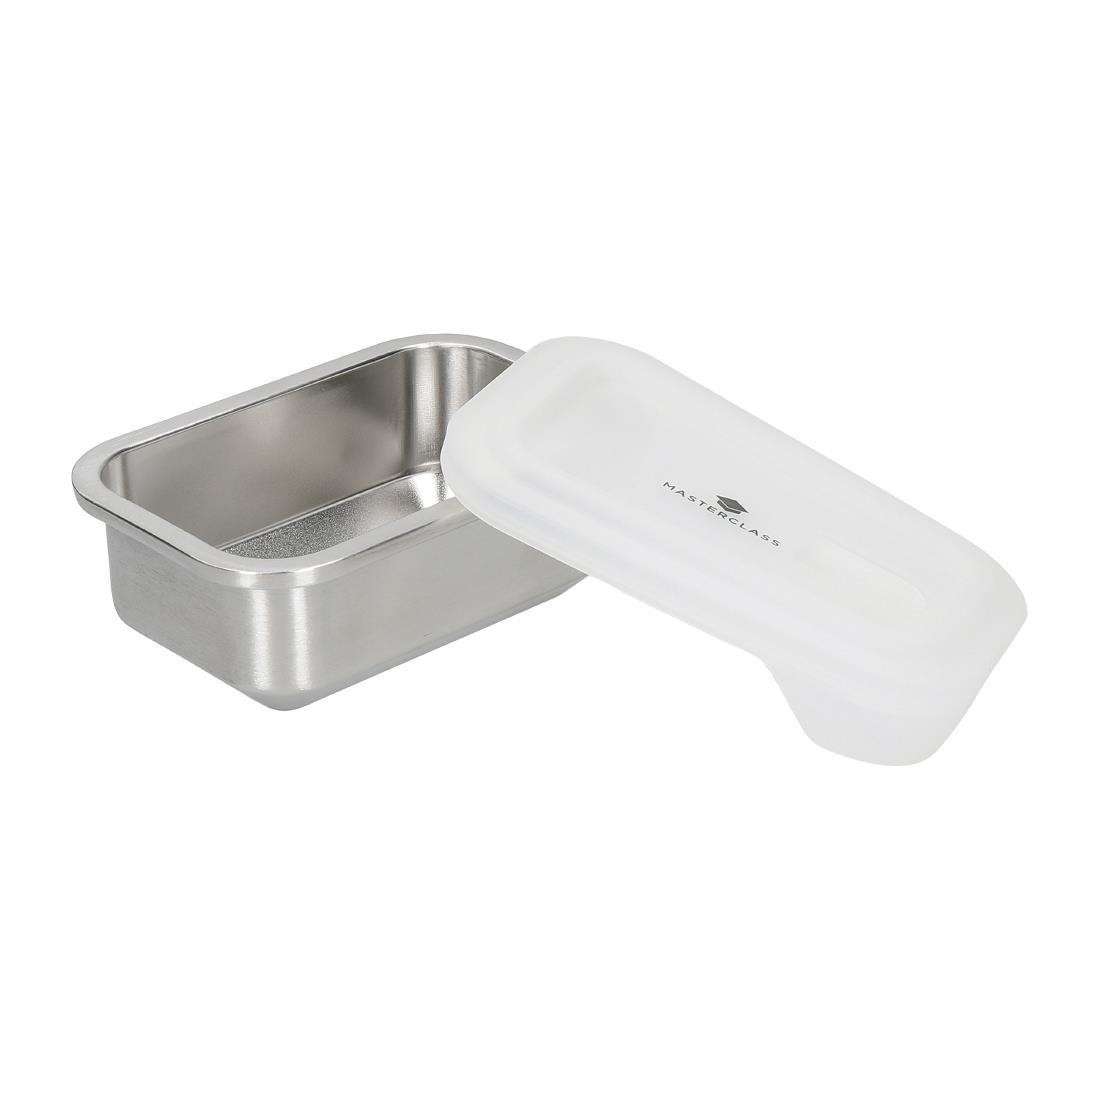 Masterclass All-in-One Stainless Steel Food Storage Dish 500ml - FW783  - 1